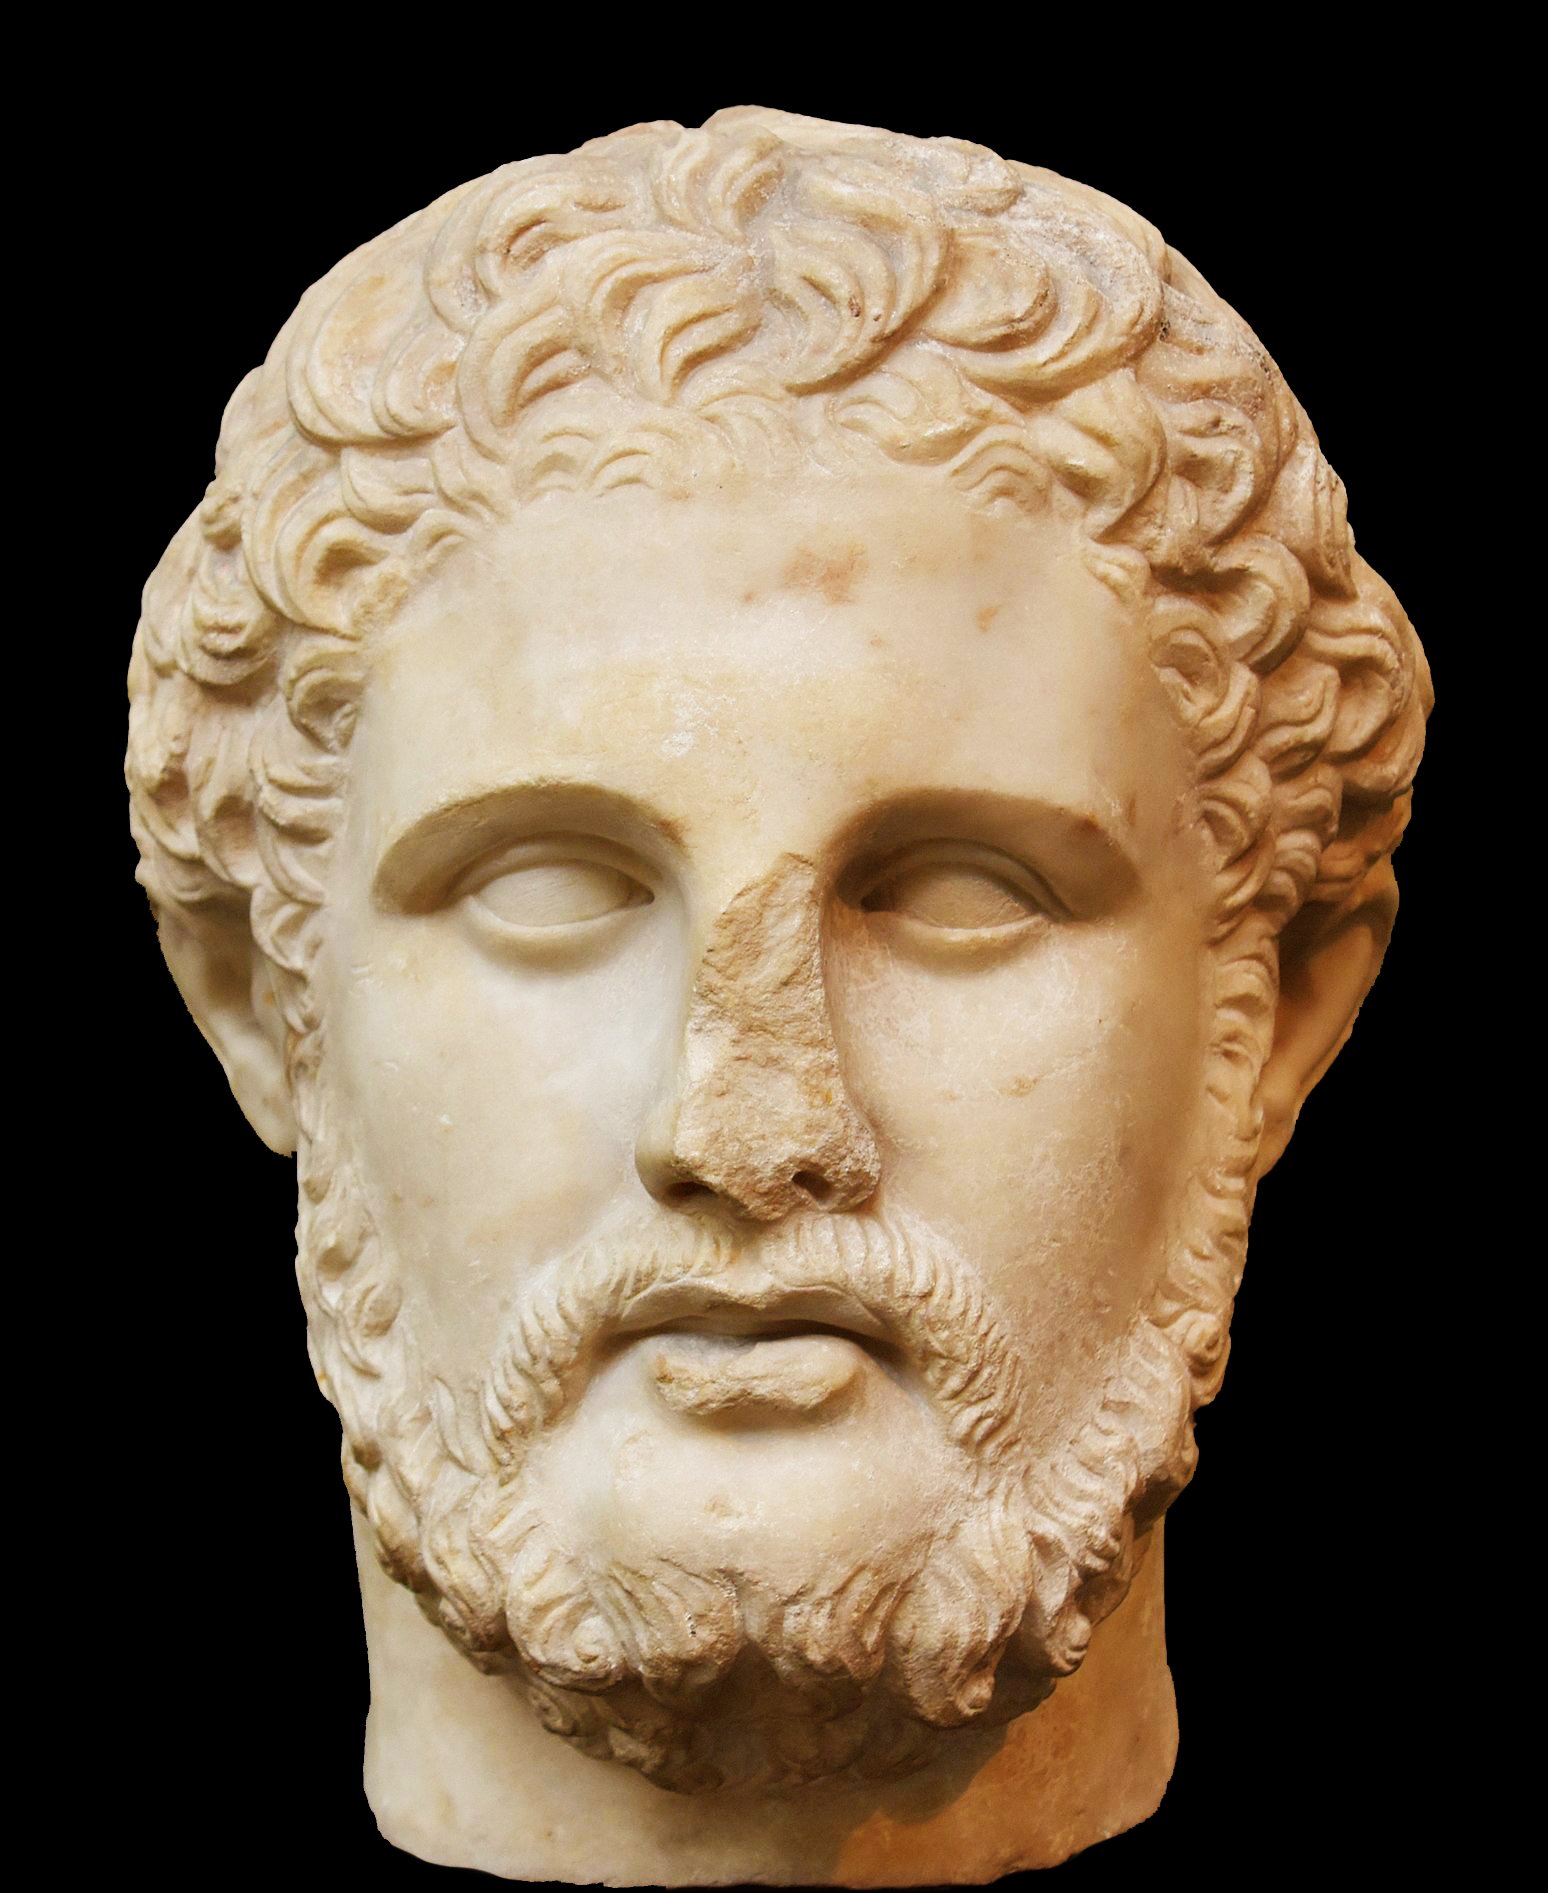 A detailed marble bust of Phillip II of Macedonia, displaying intricate facial features such as wavy hair, deep-set eyes, and a prominent beard.